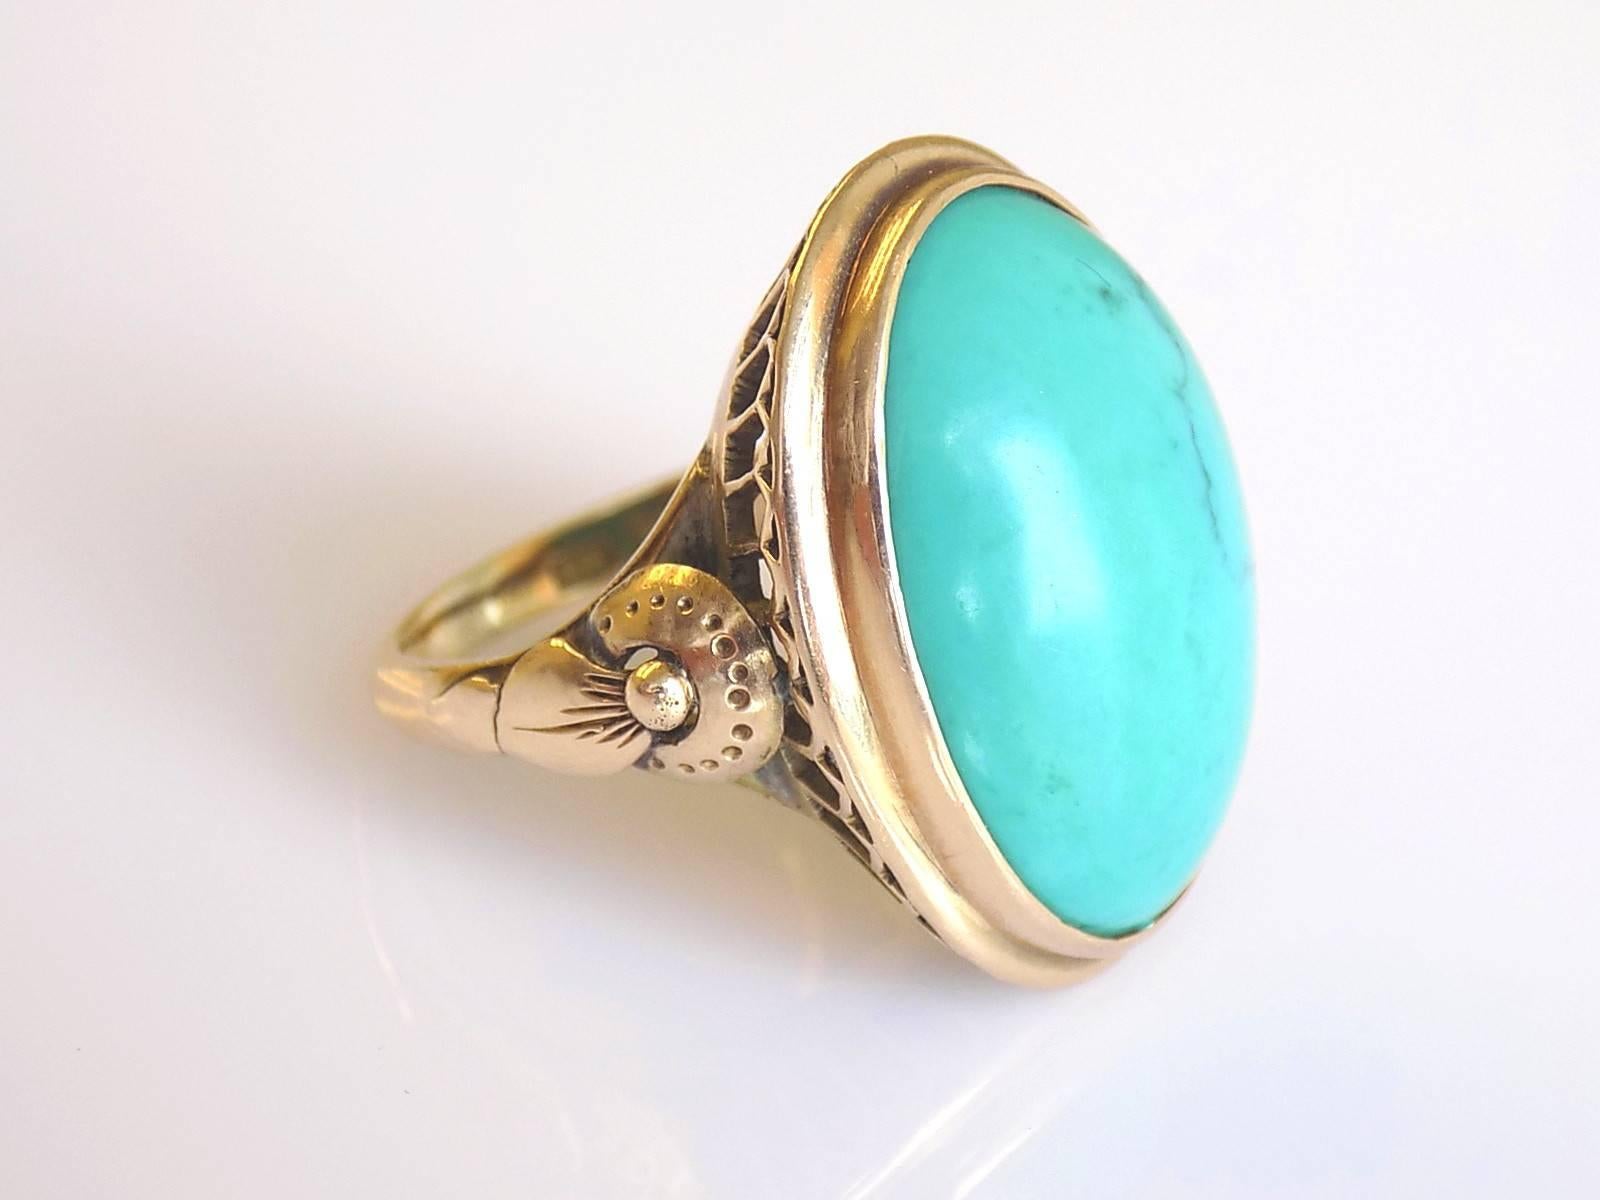 A Large Vintage c.1970s Chinese 14 Carat Gold and Turquoise cocktail ring.
Size L UK, 6 US.
Height of the face including setting 25mm (1").
Weight 8.9gr.
Marked: 14K for 14 carat gold, HK for Hong Kong.
The ring in good condition and ready to